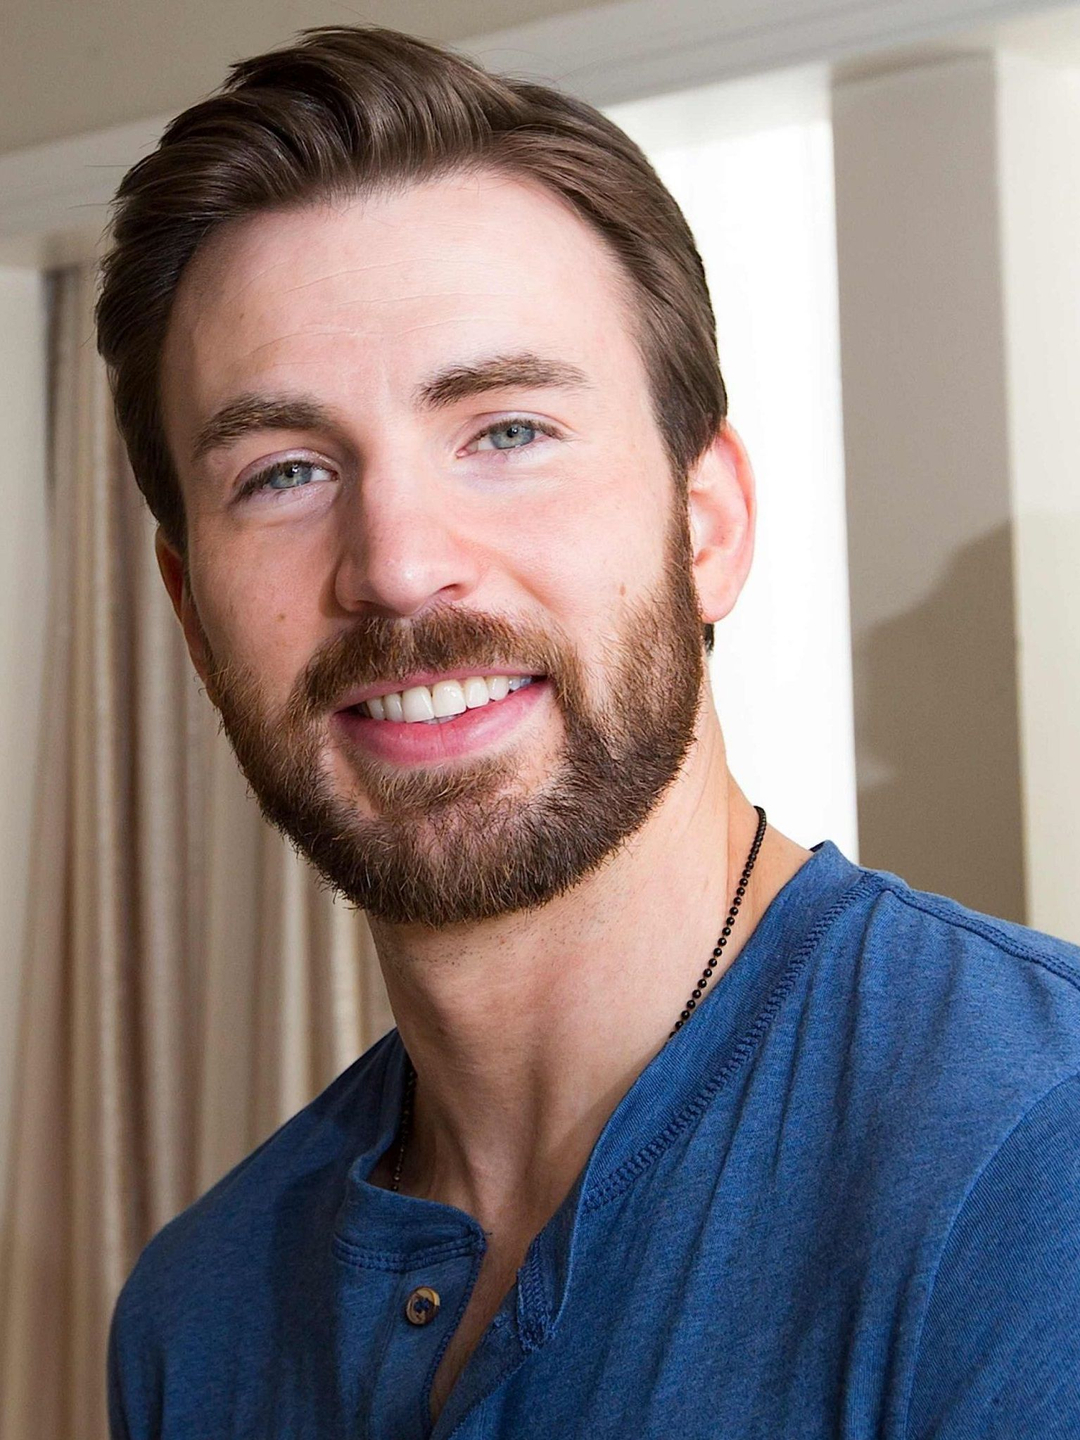 Chris Evans who is his father